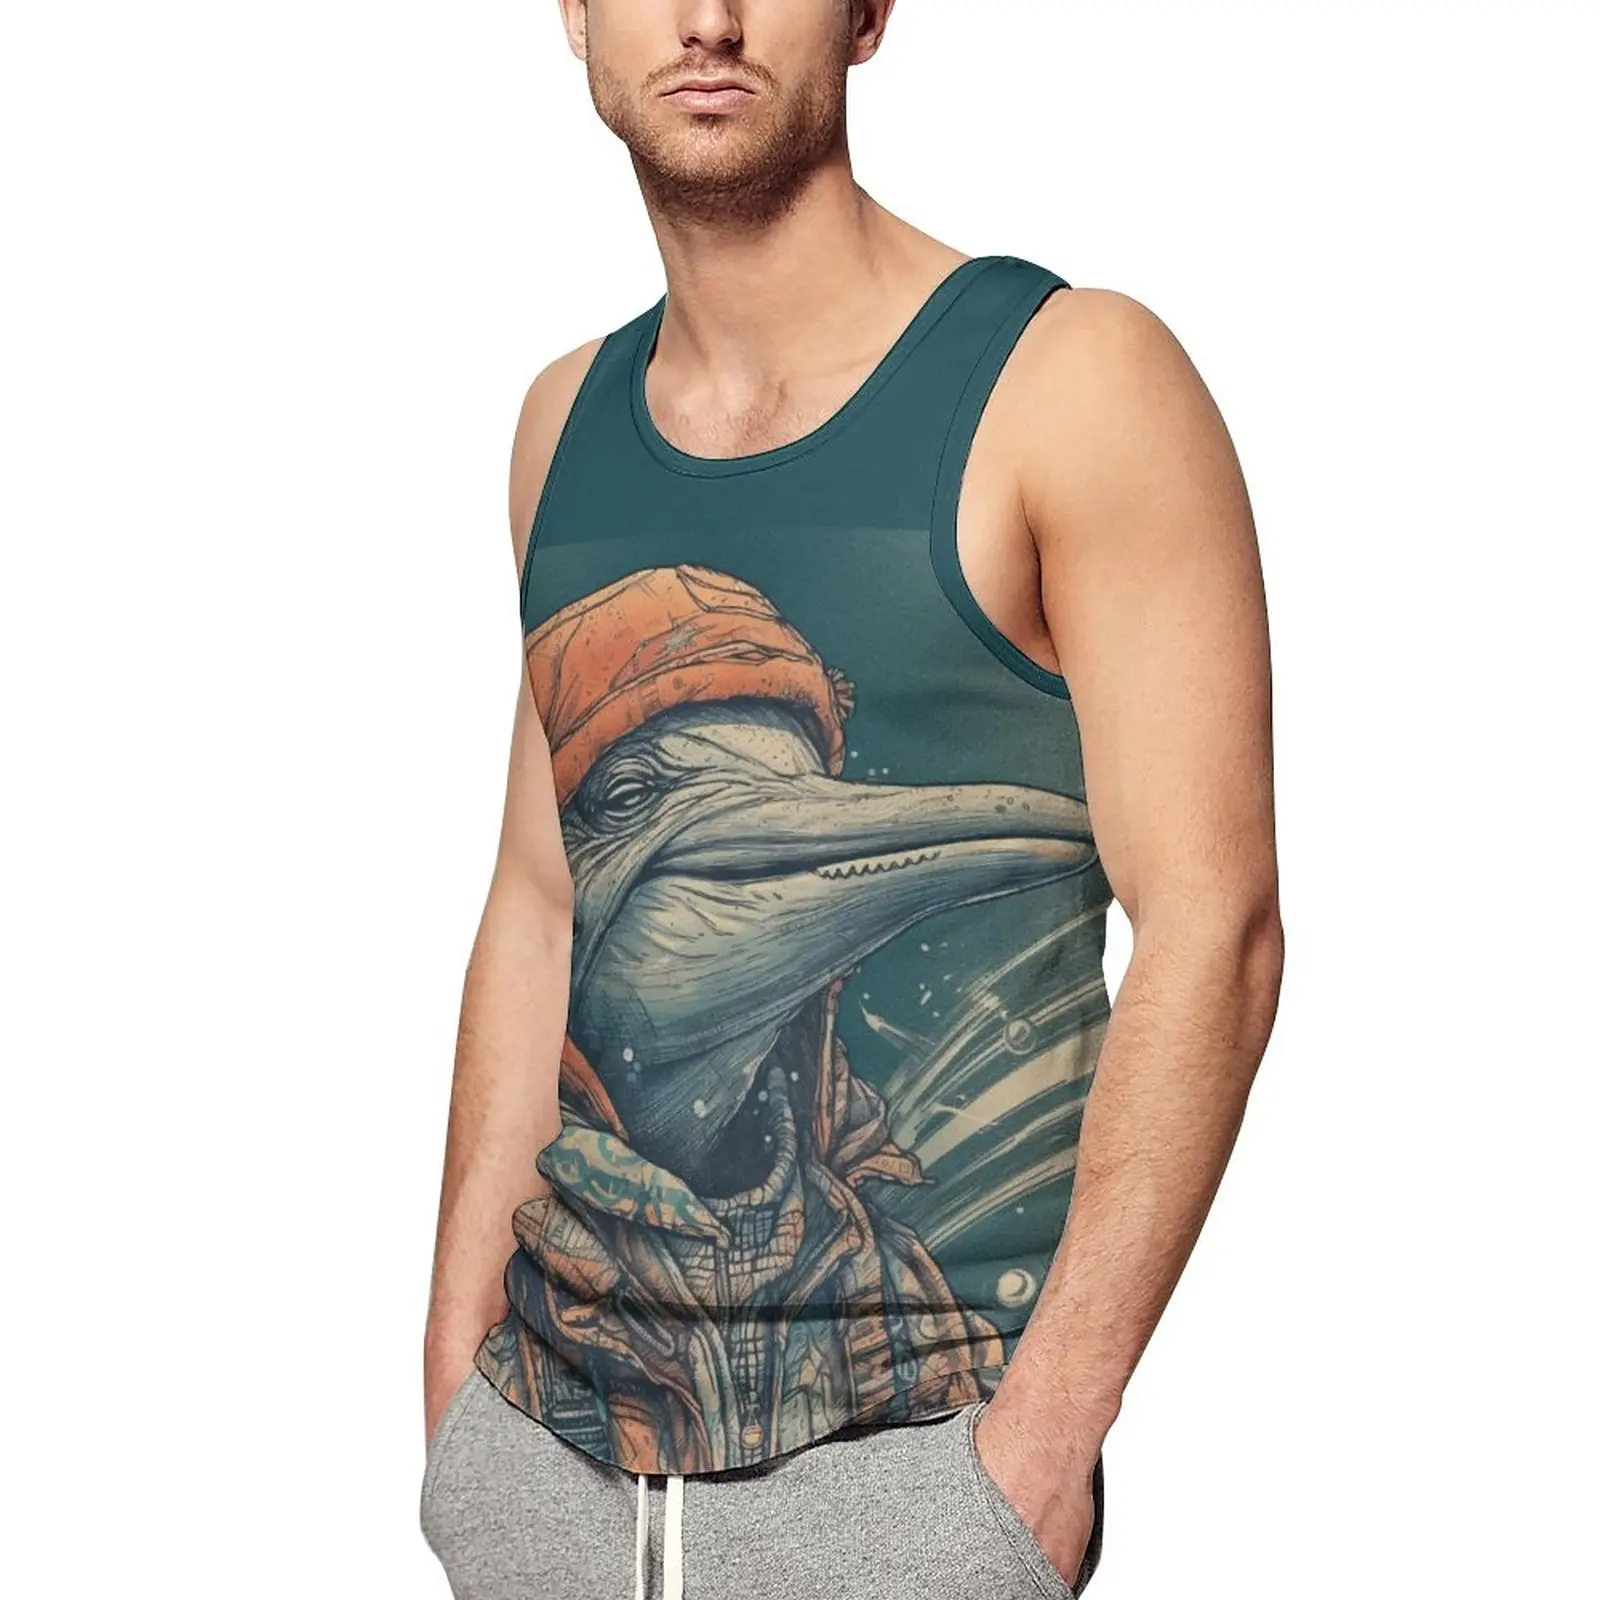 

Dolphin Tank Top Male Pop Caricatures Illustration Tops Daily Printed Training Muscle Oversized Sleeveless Vests